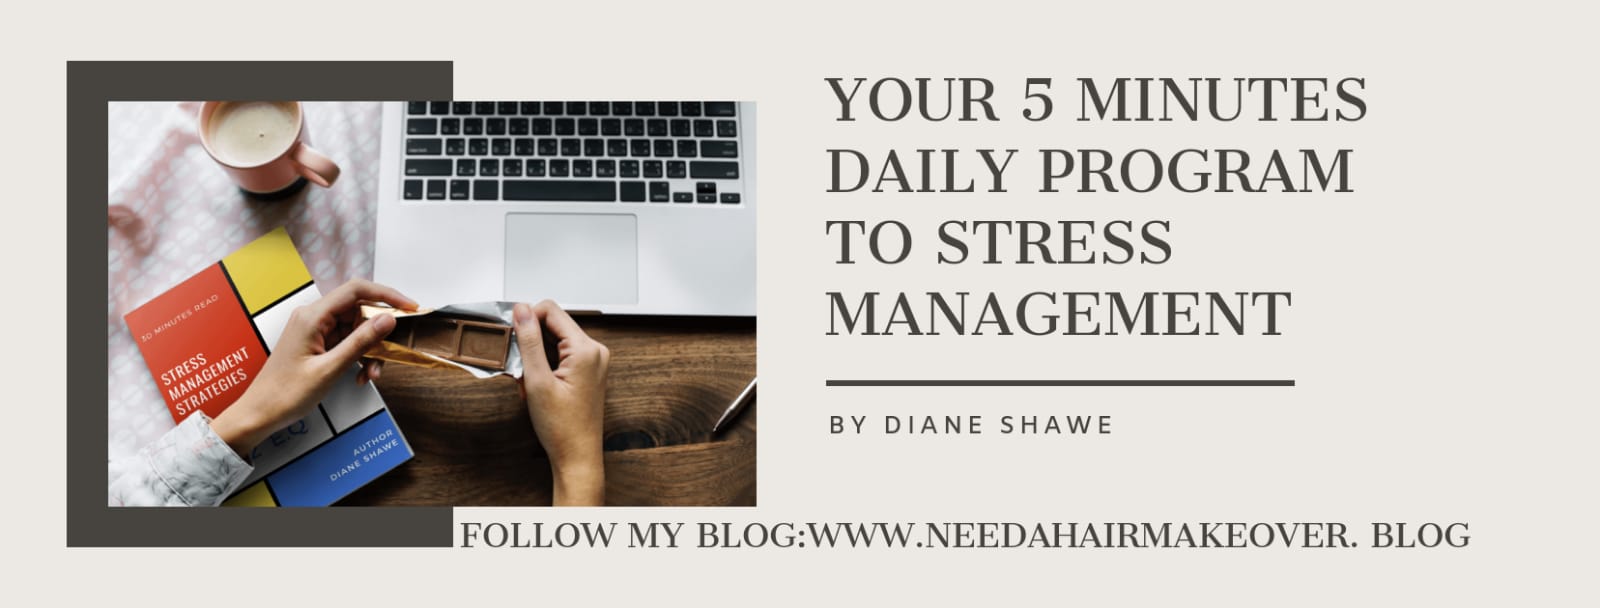 Introduce article by diane shawe on managing stress